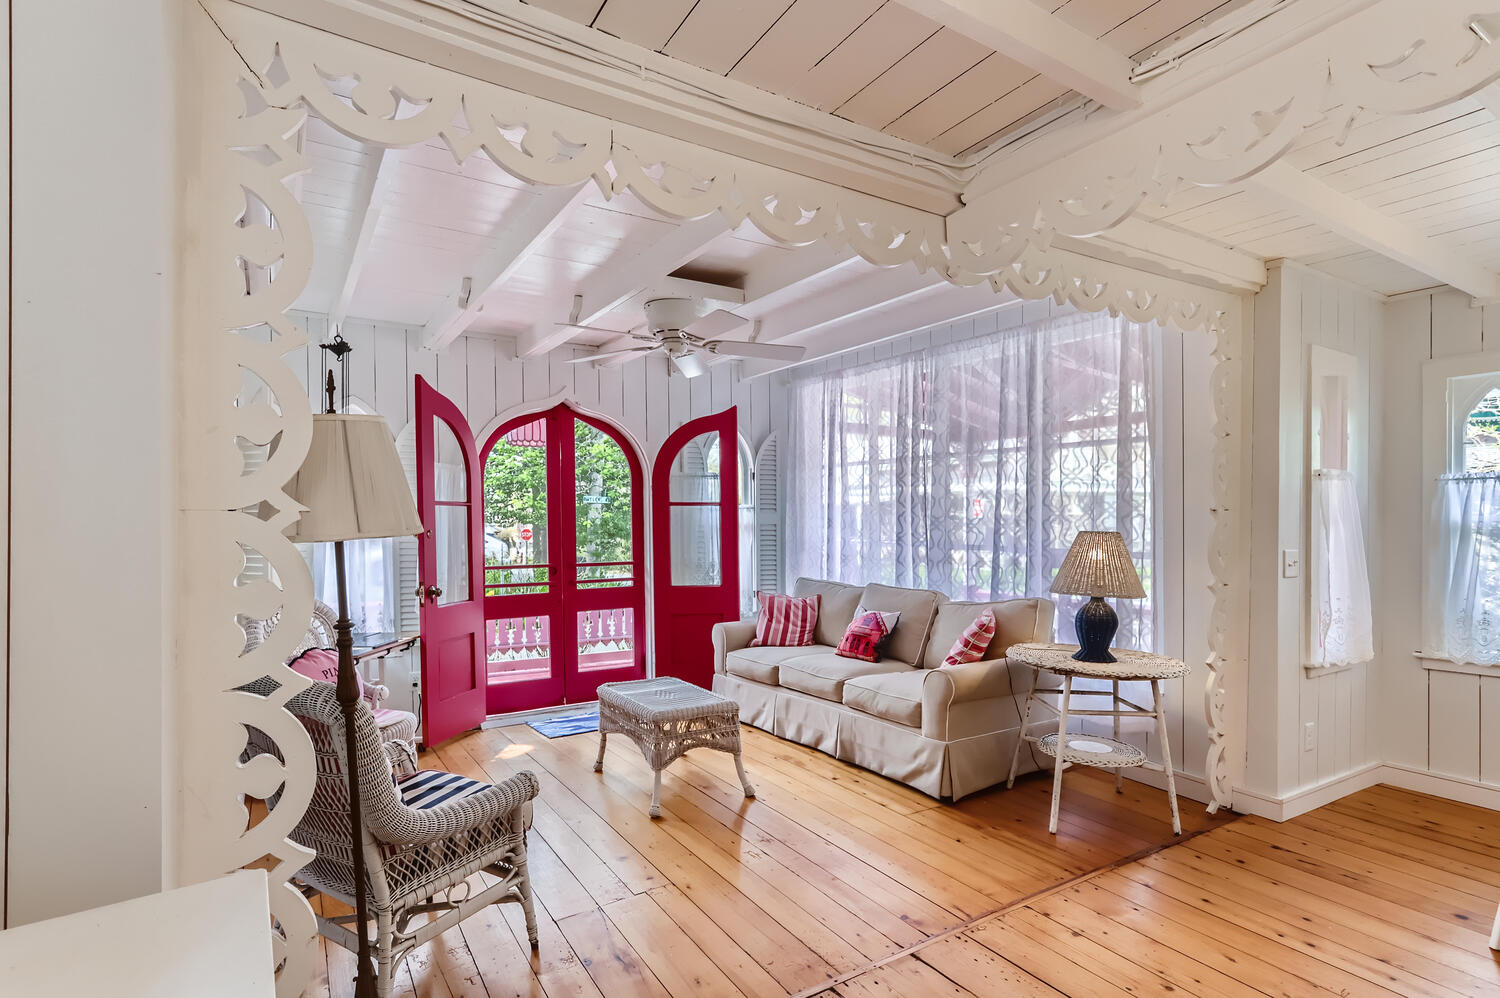 A white room with exposed beams and a bright pink arched door.